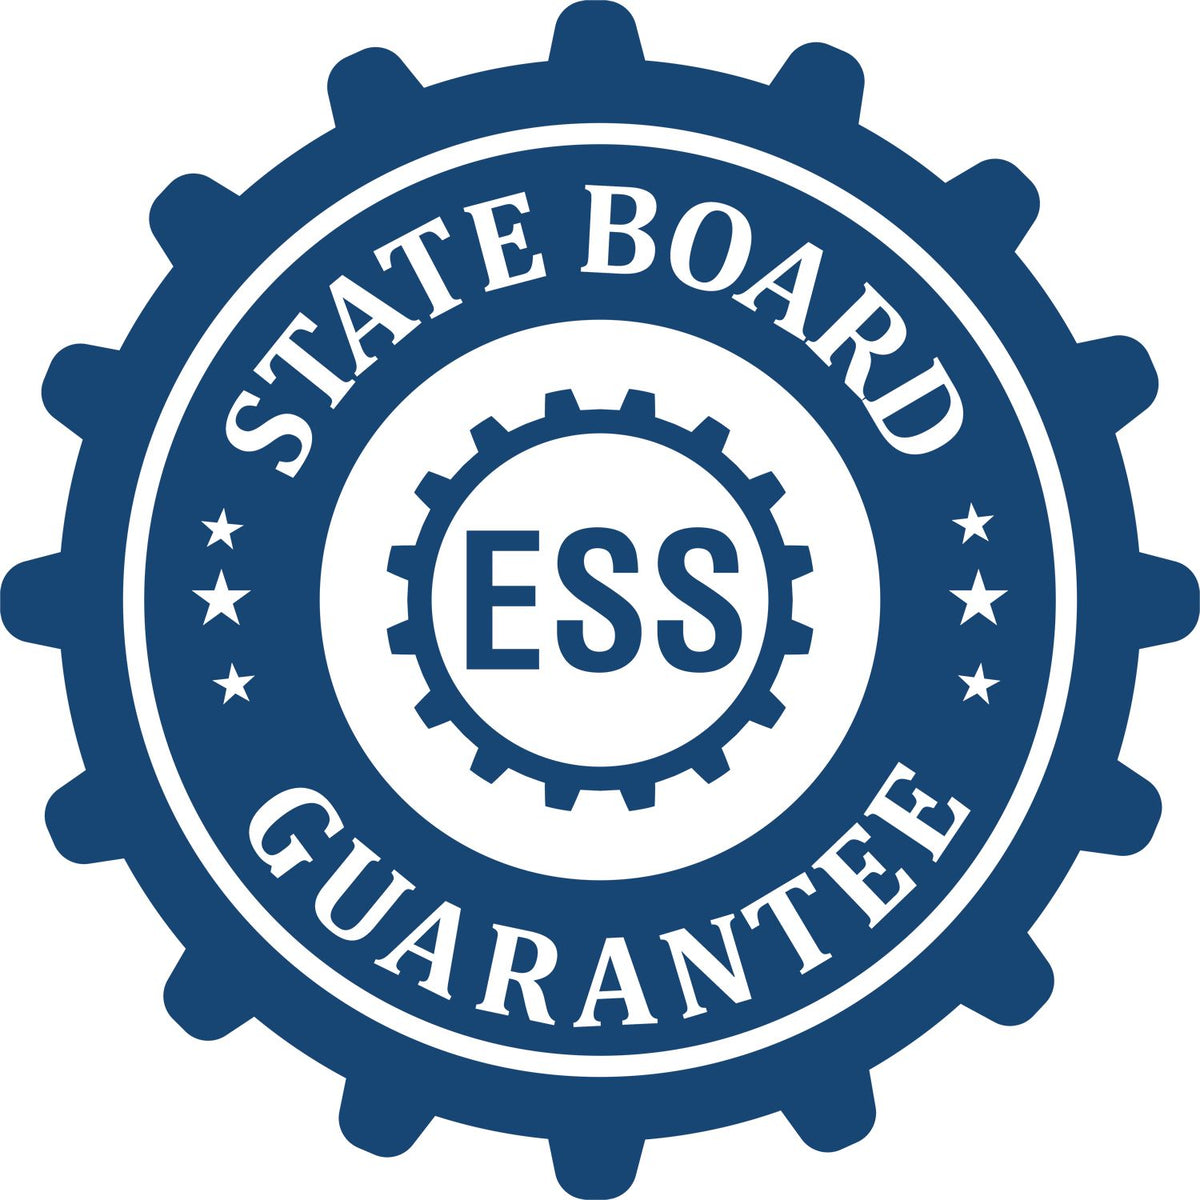 An emblem in a gear shape illustrating a state board guarantee for the Handheld Arkansas Land Surveyor Seal product.